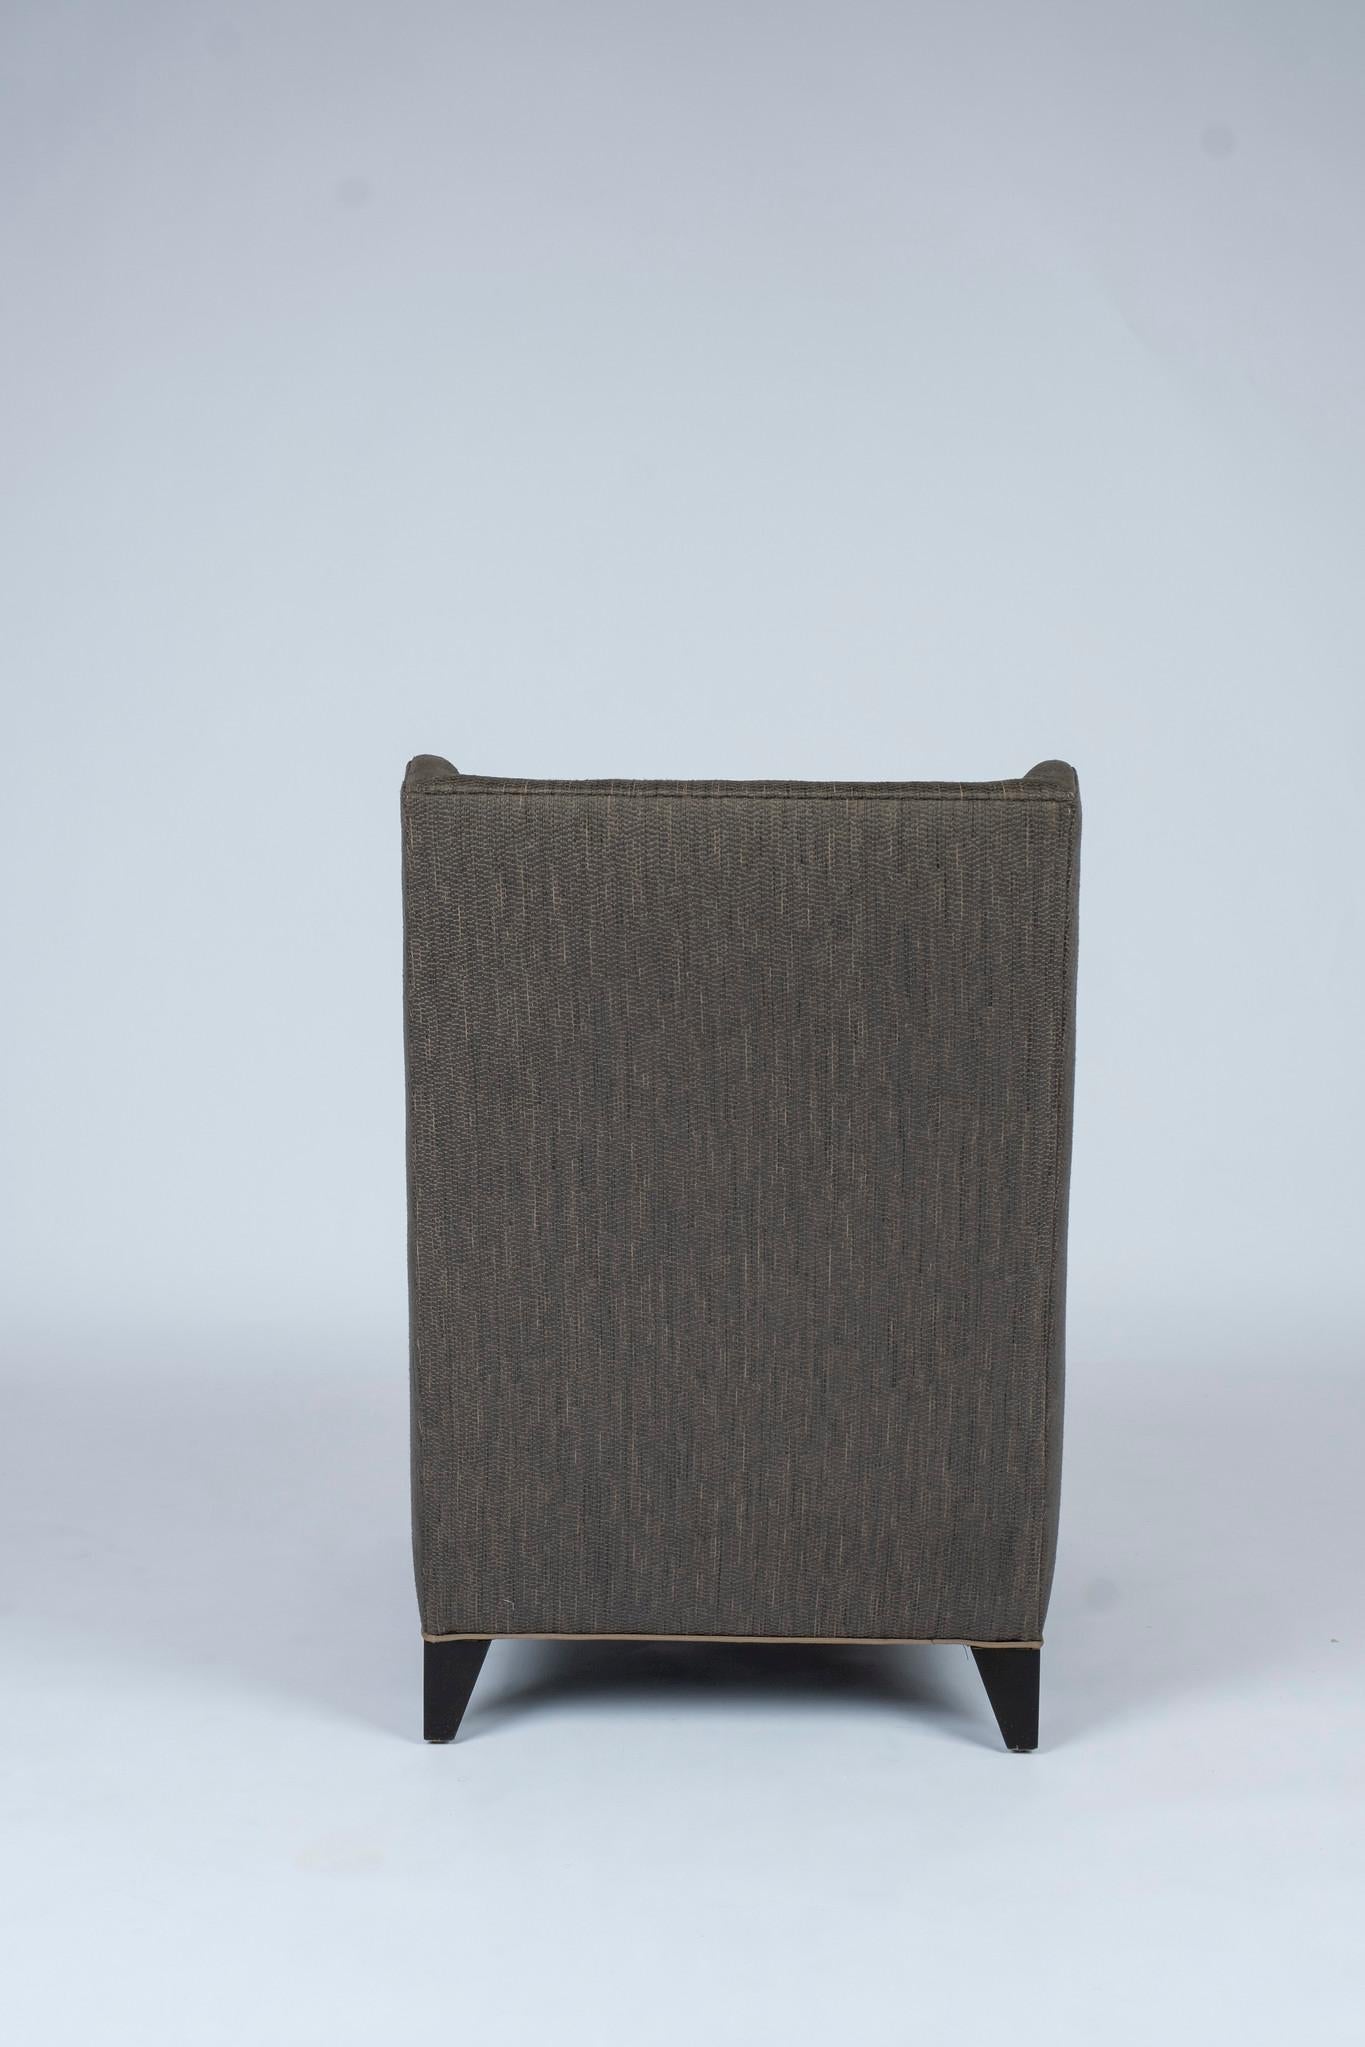 Contemporary Donghia Milo Chair For Sale